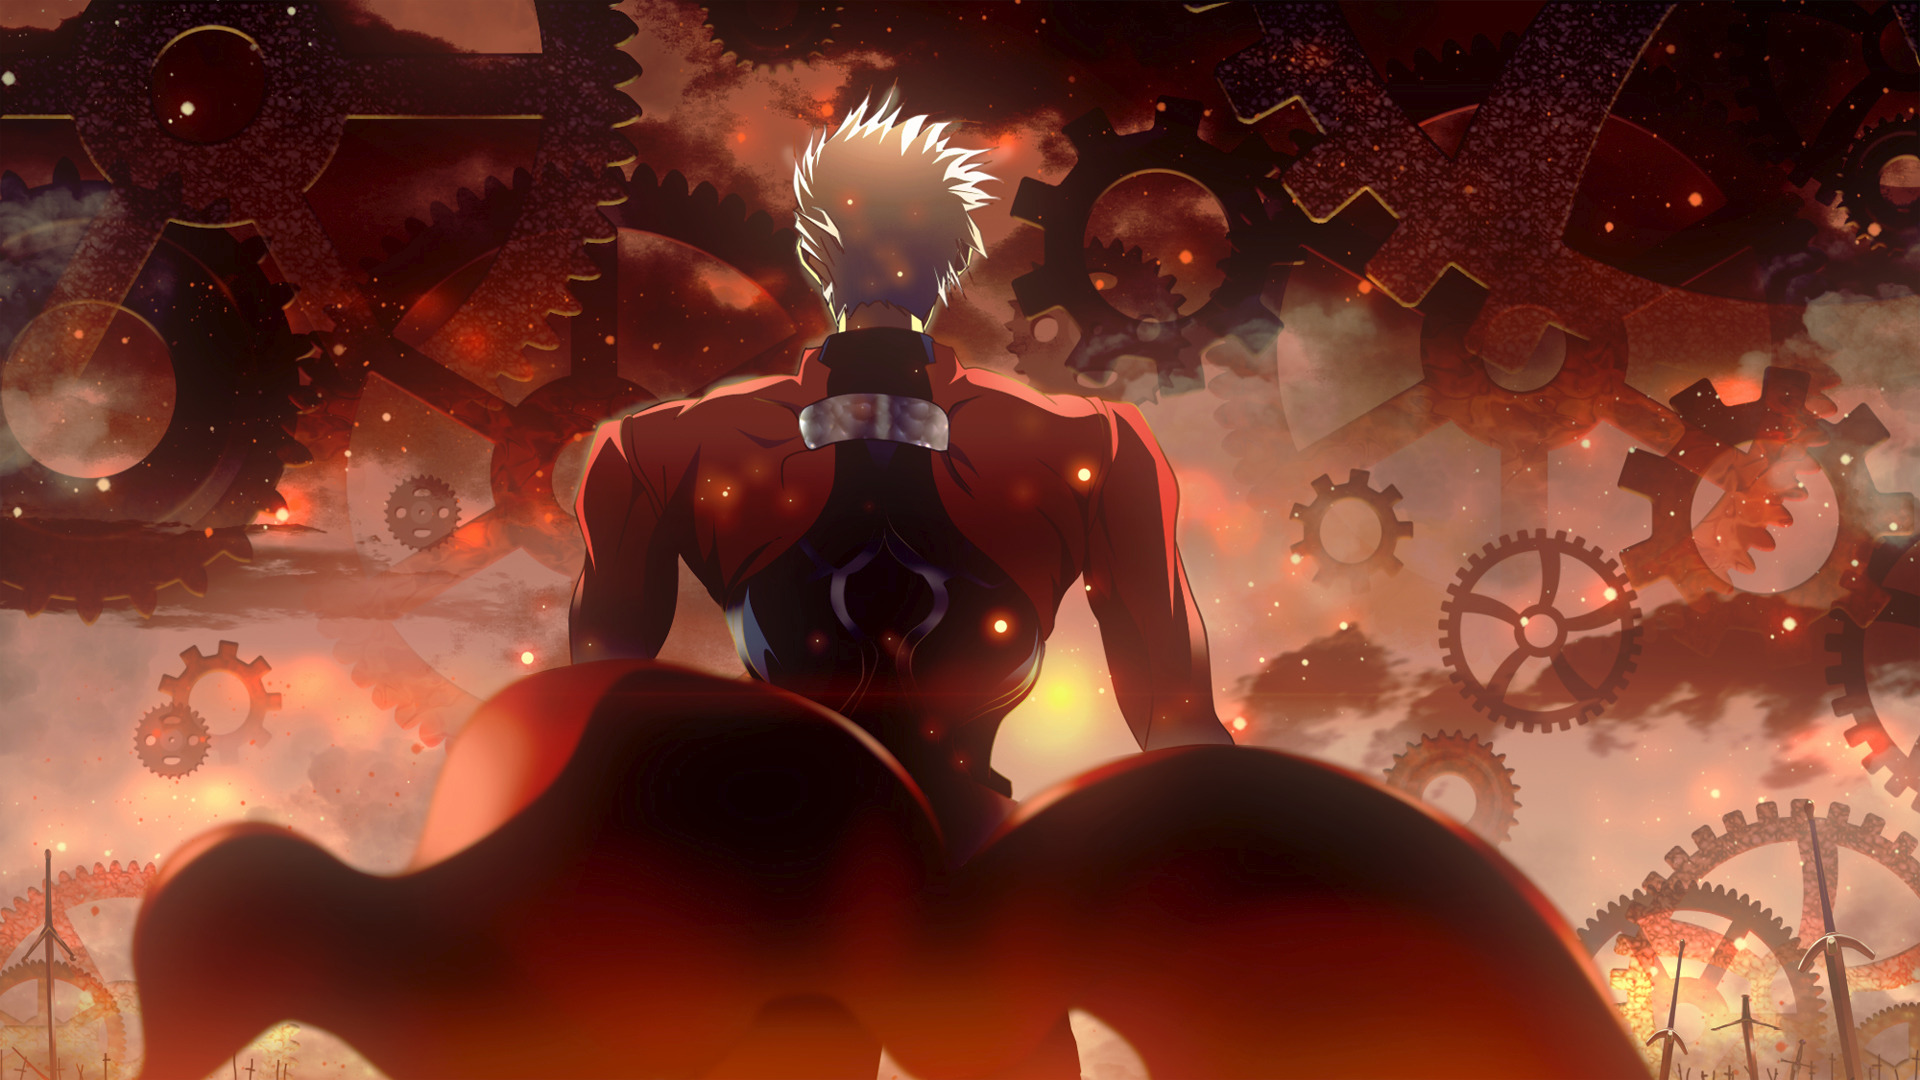 Fate Series, Archer (Fate Stay Night), Fate Stay Night Wallpapers HD